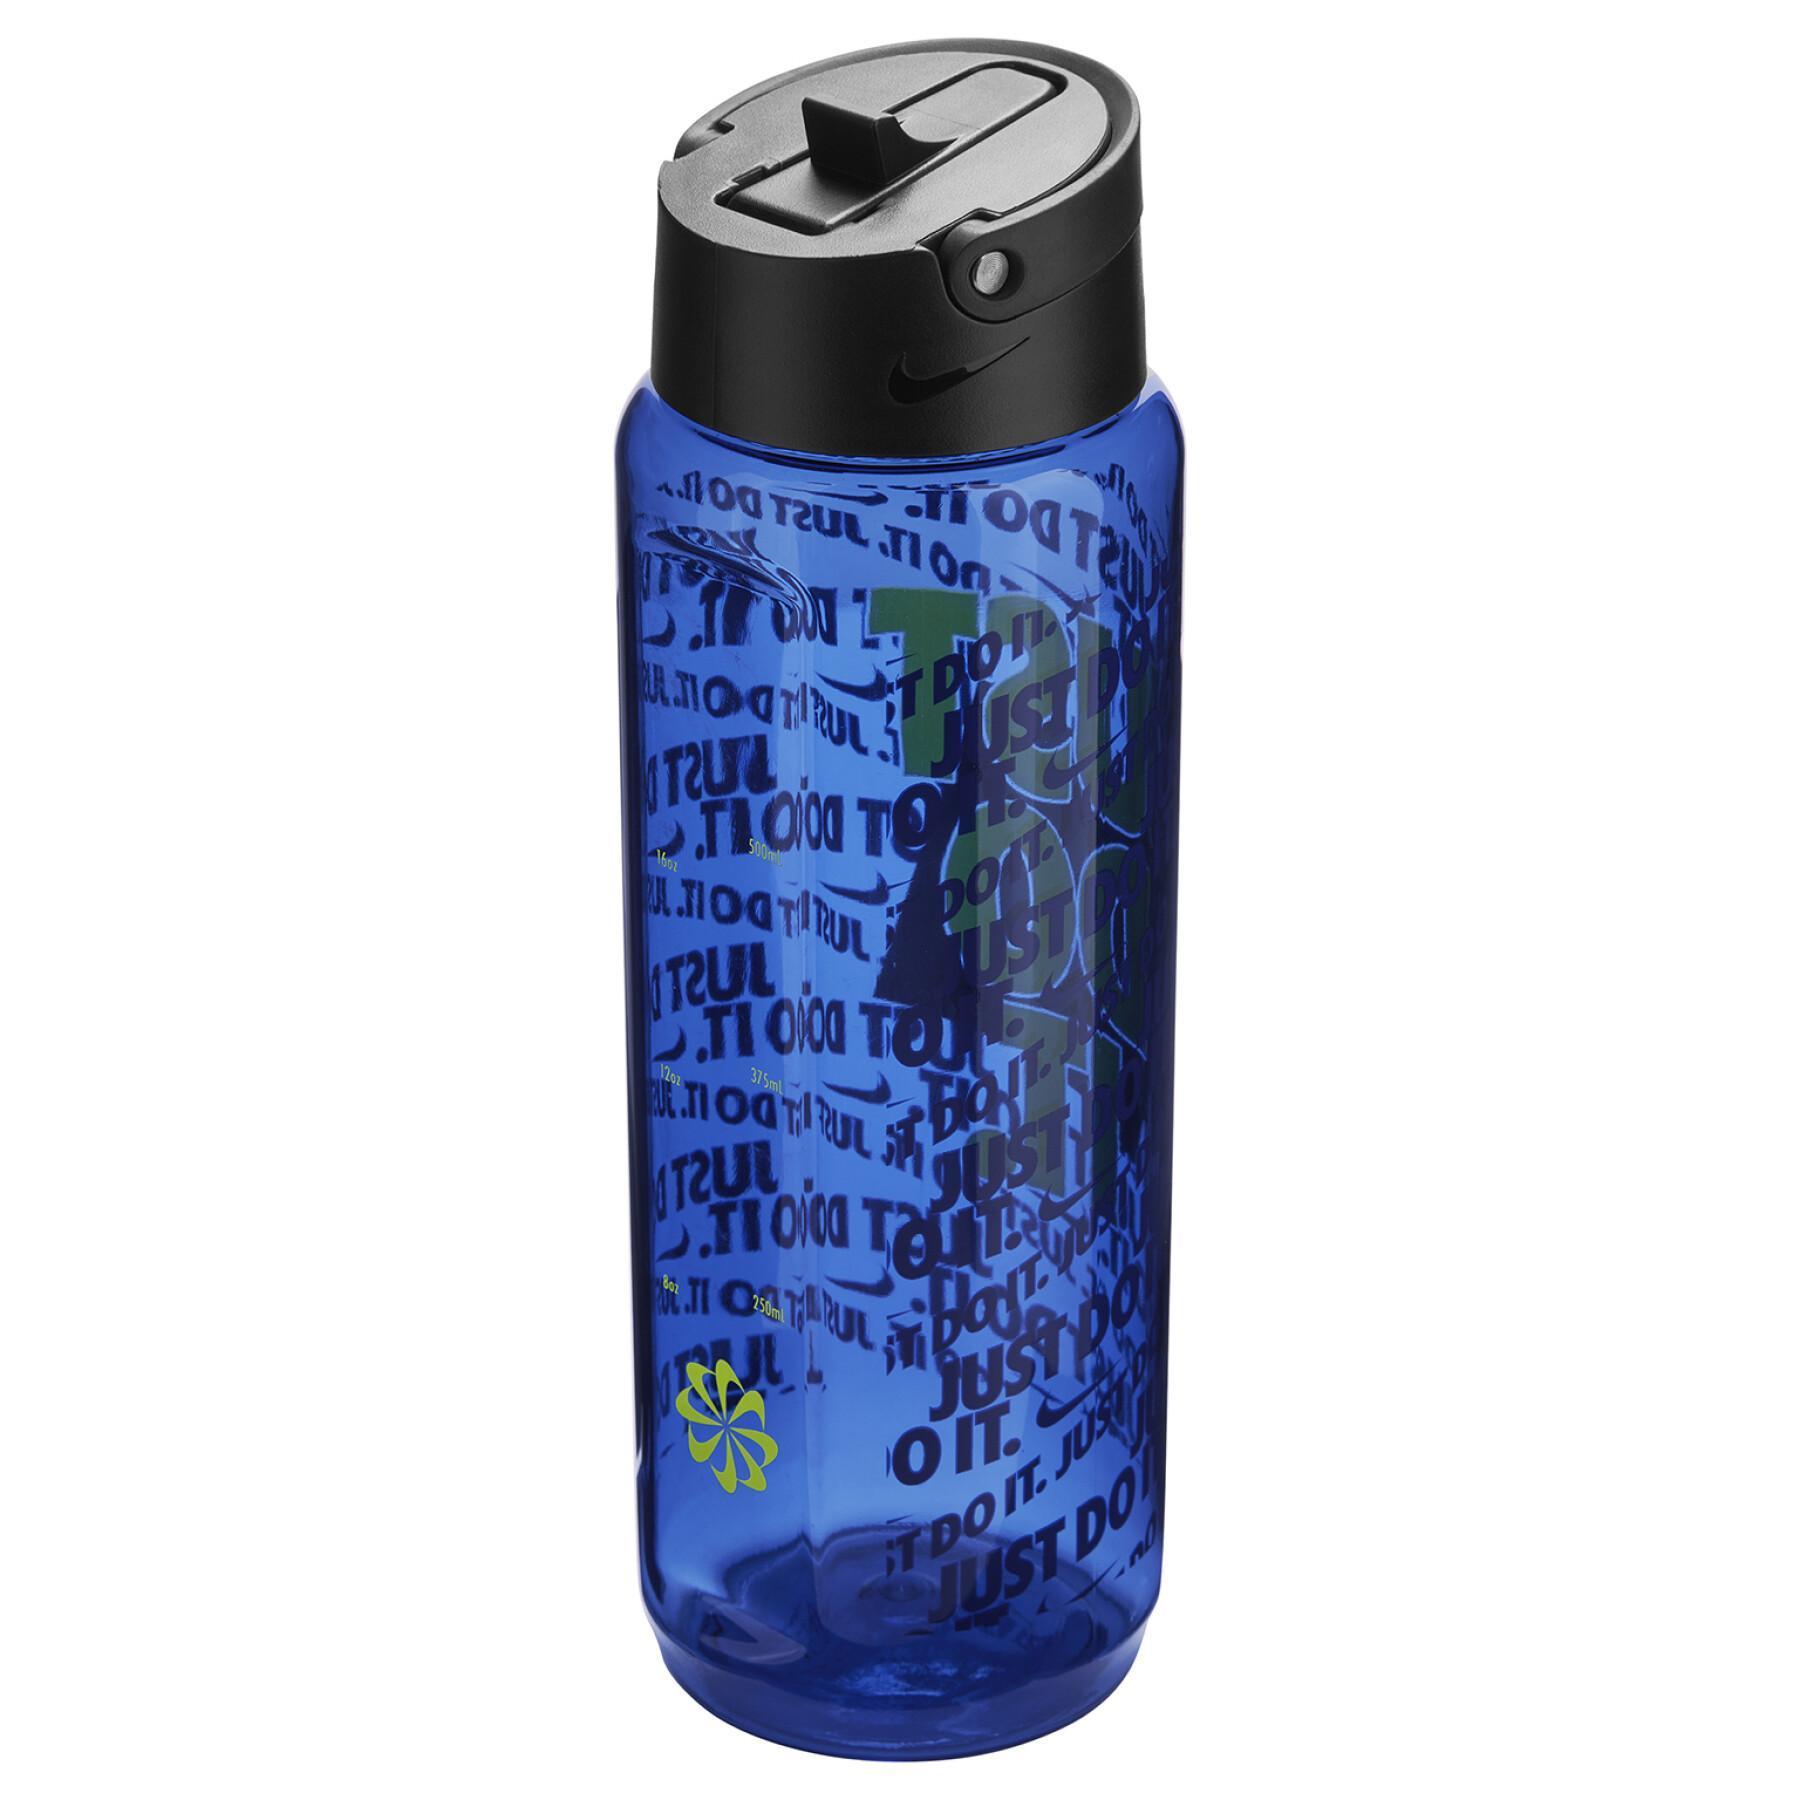 Trinkflasche aus Stroh Nike TR Renew Recharge Graphic